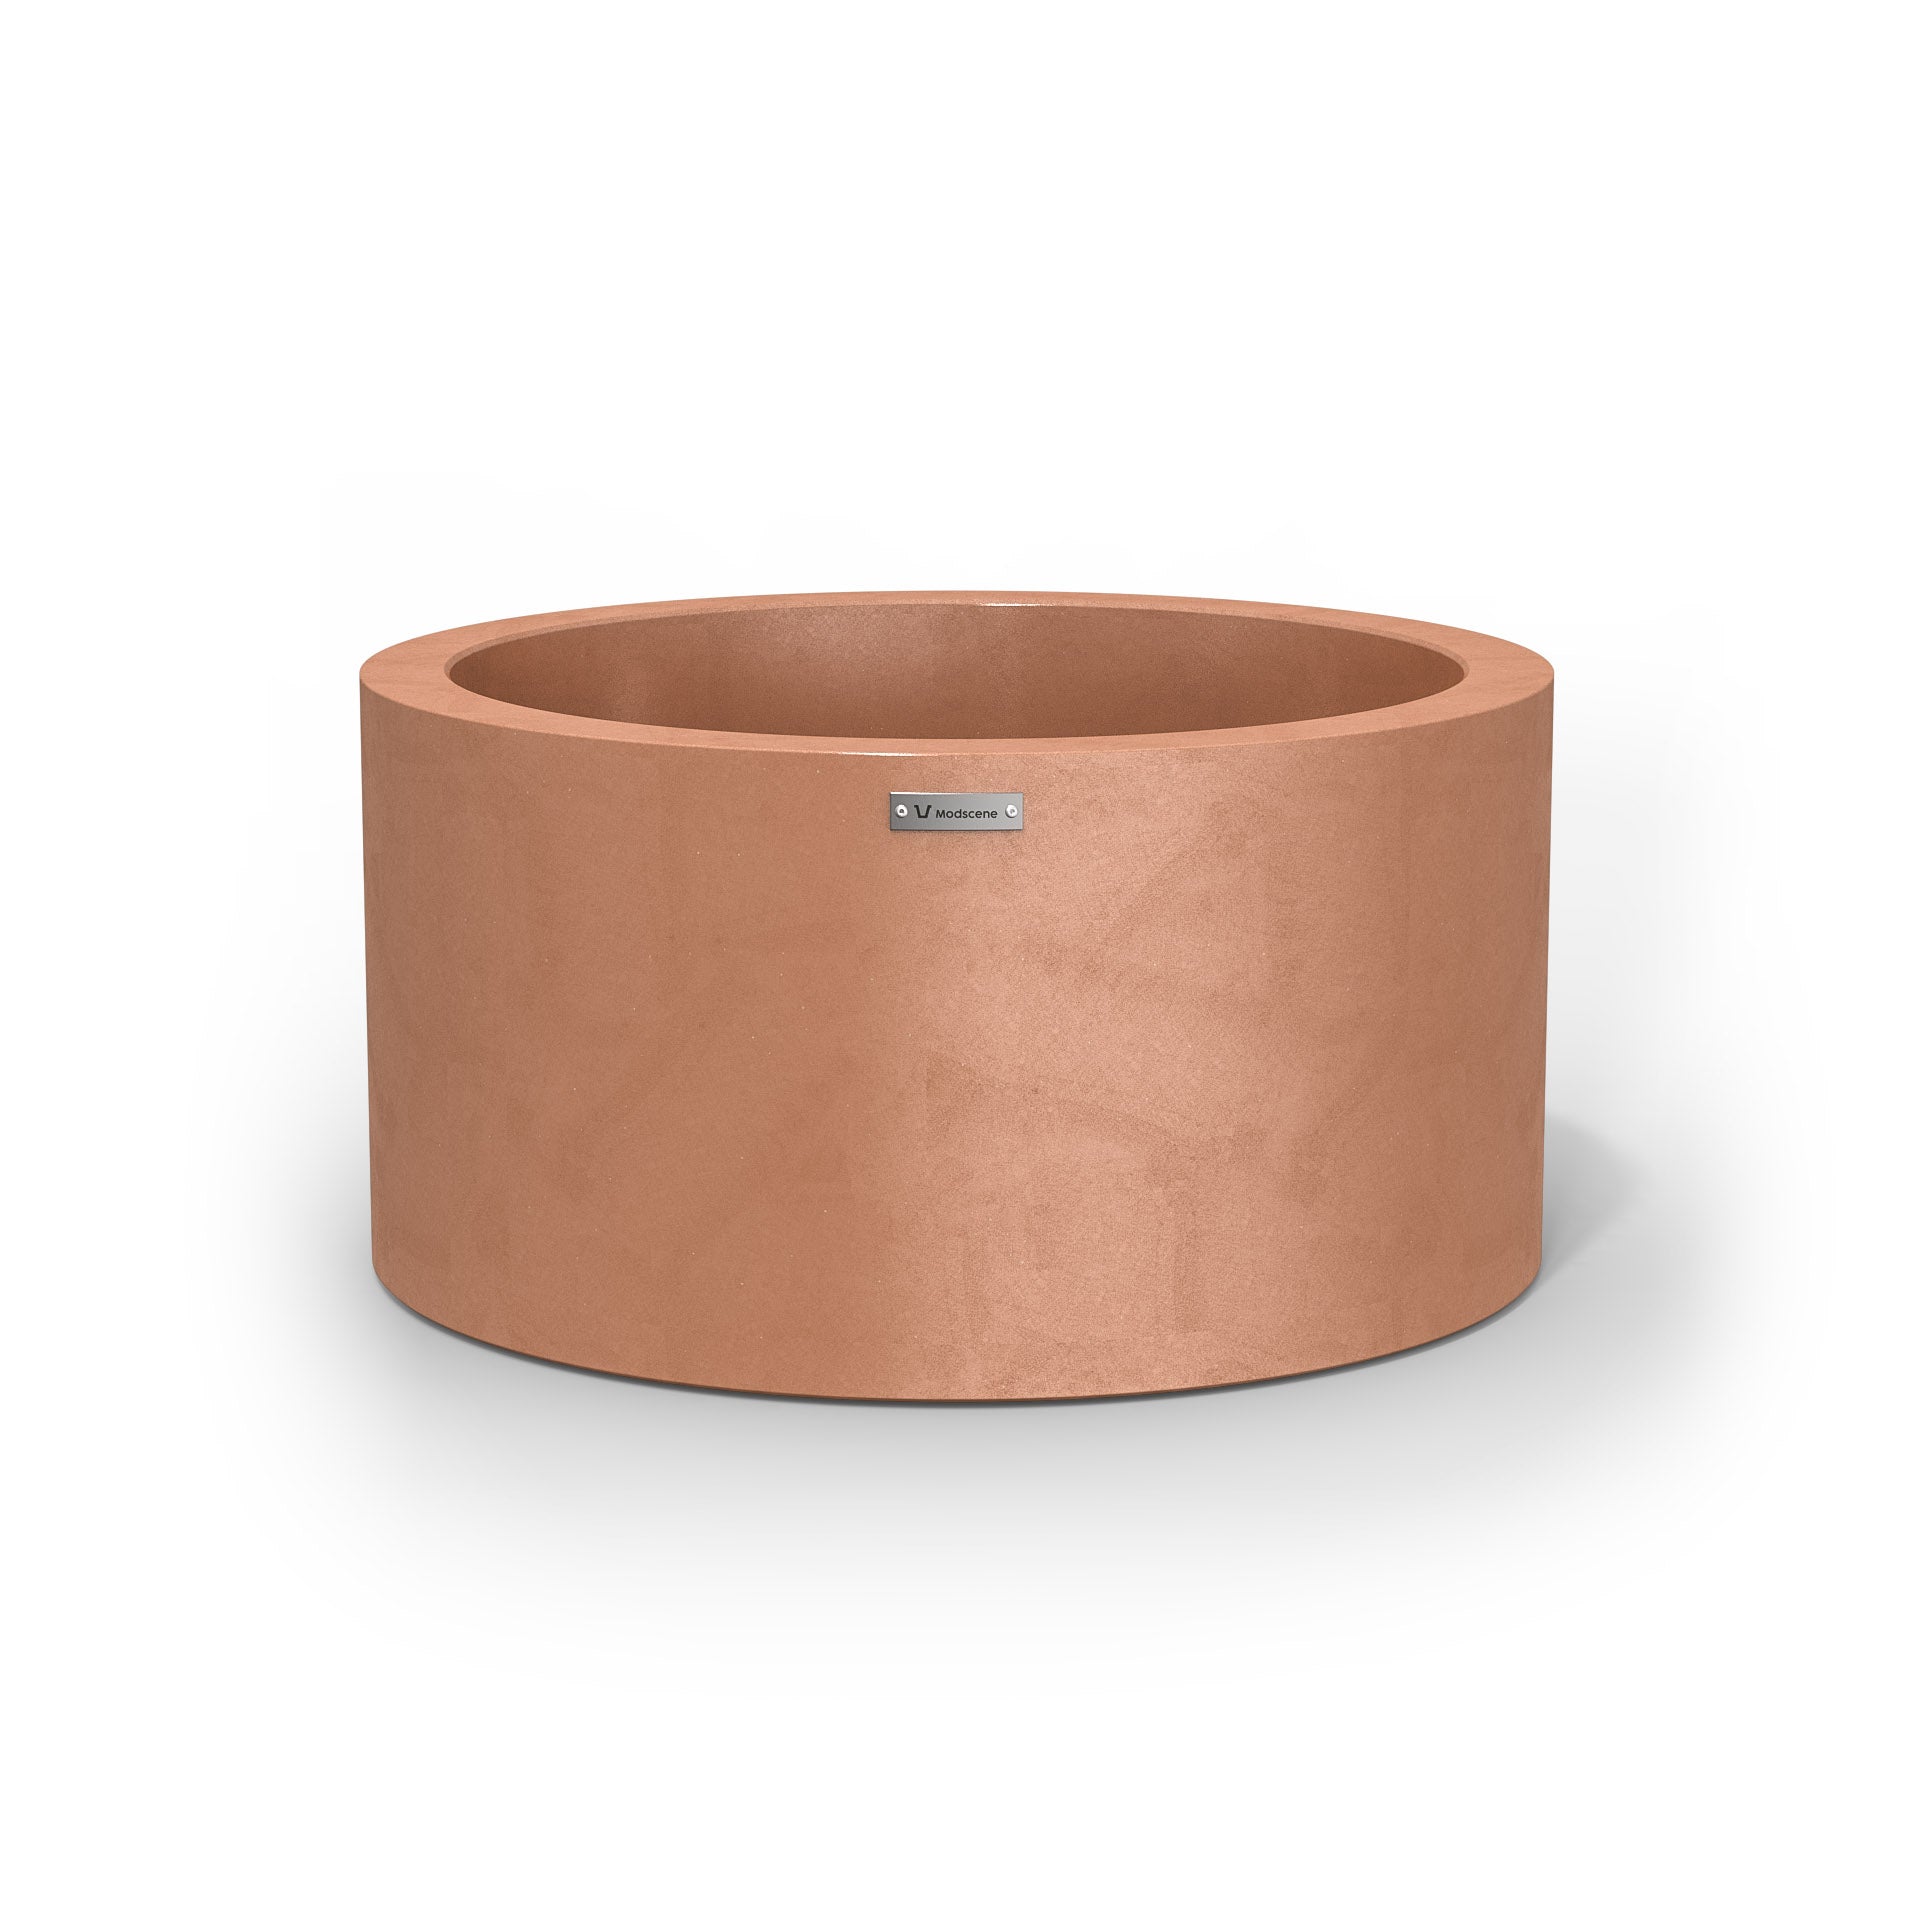 A medium sized planter pot in a rustic terracotta colour made by Modscene.